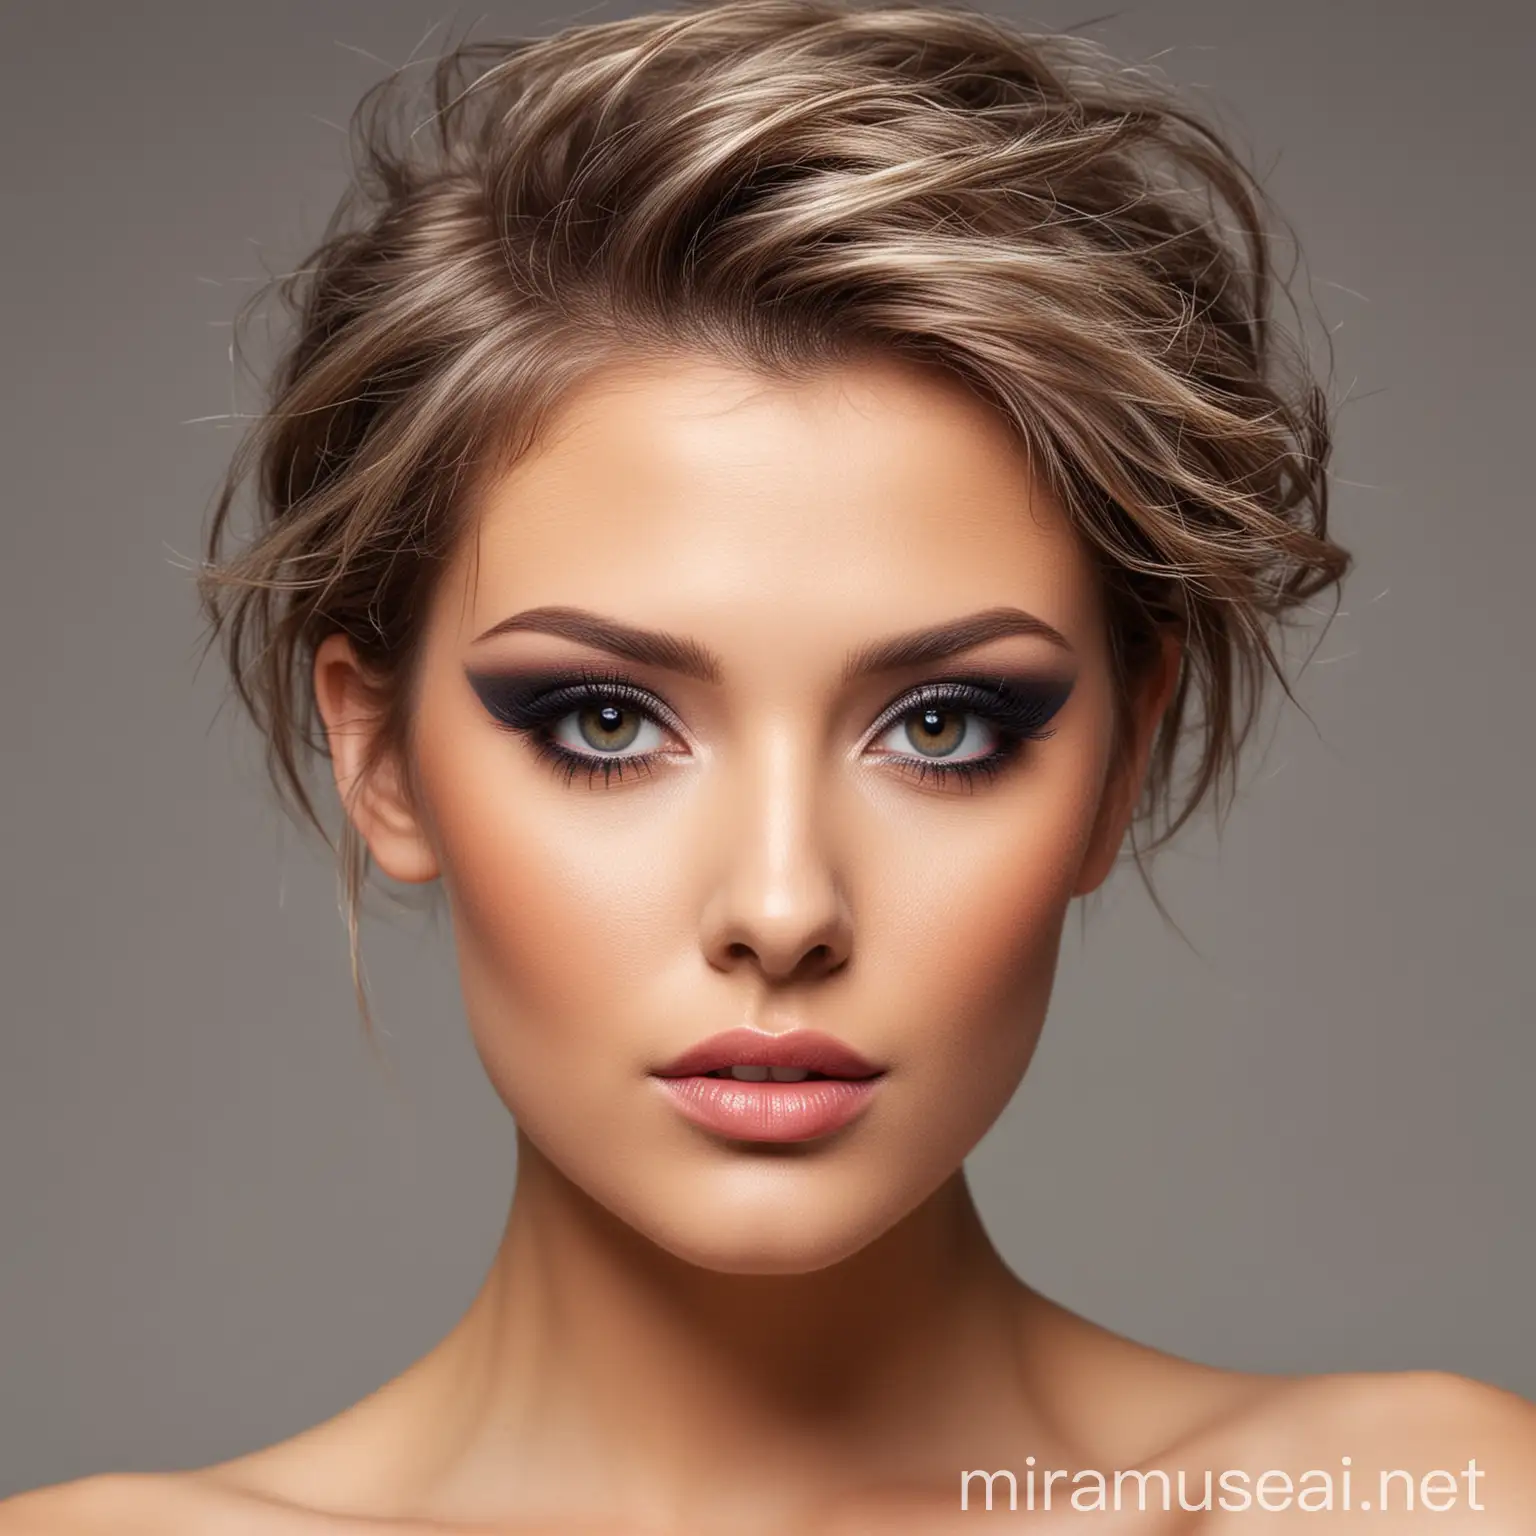 Stylish Makeup Model with Trendy Hairstyle